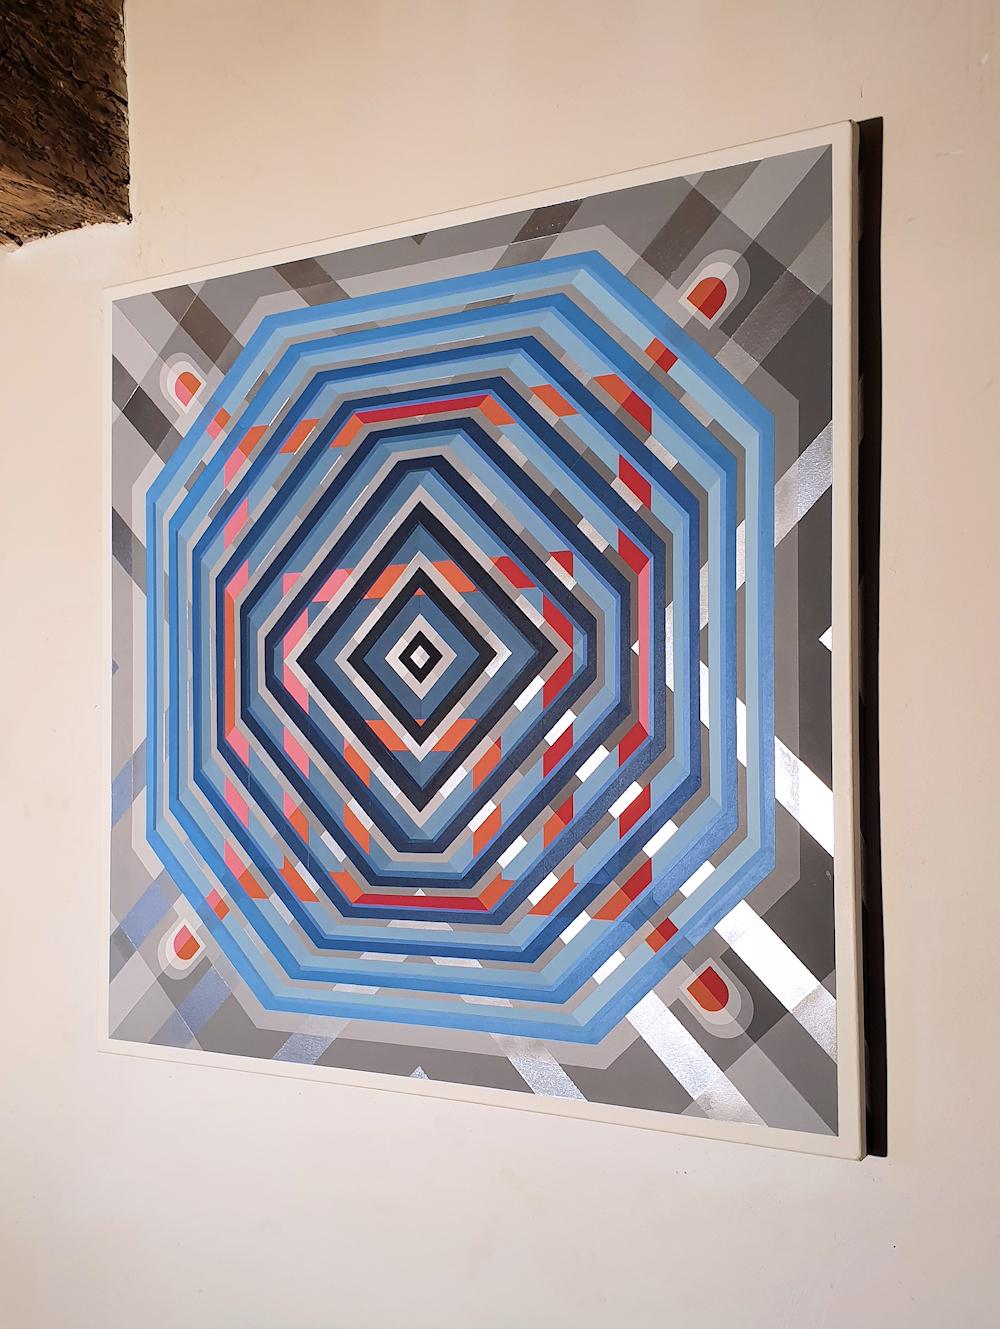 Contemporary acrylic painting on canvas, large square shape, by French artist Philippe Delhom, 2020.
The abstract geometric pattern, with blue, red and orange colors change through the reflections of the silver back-ground. The geometric design